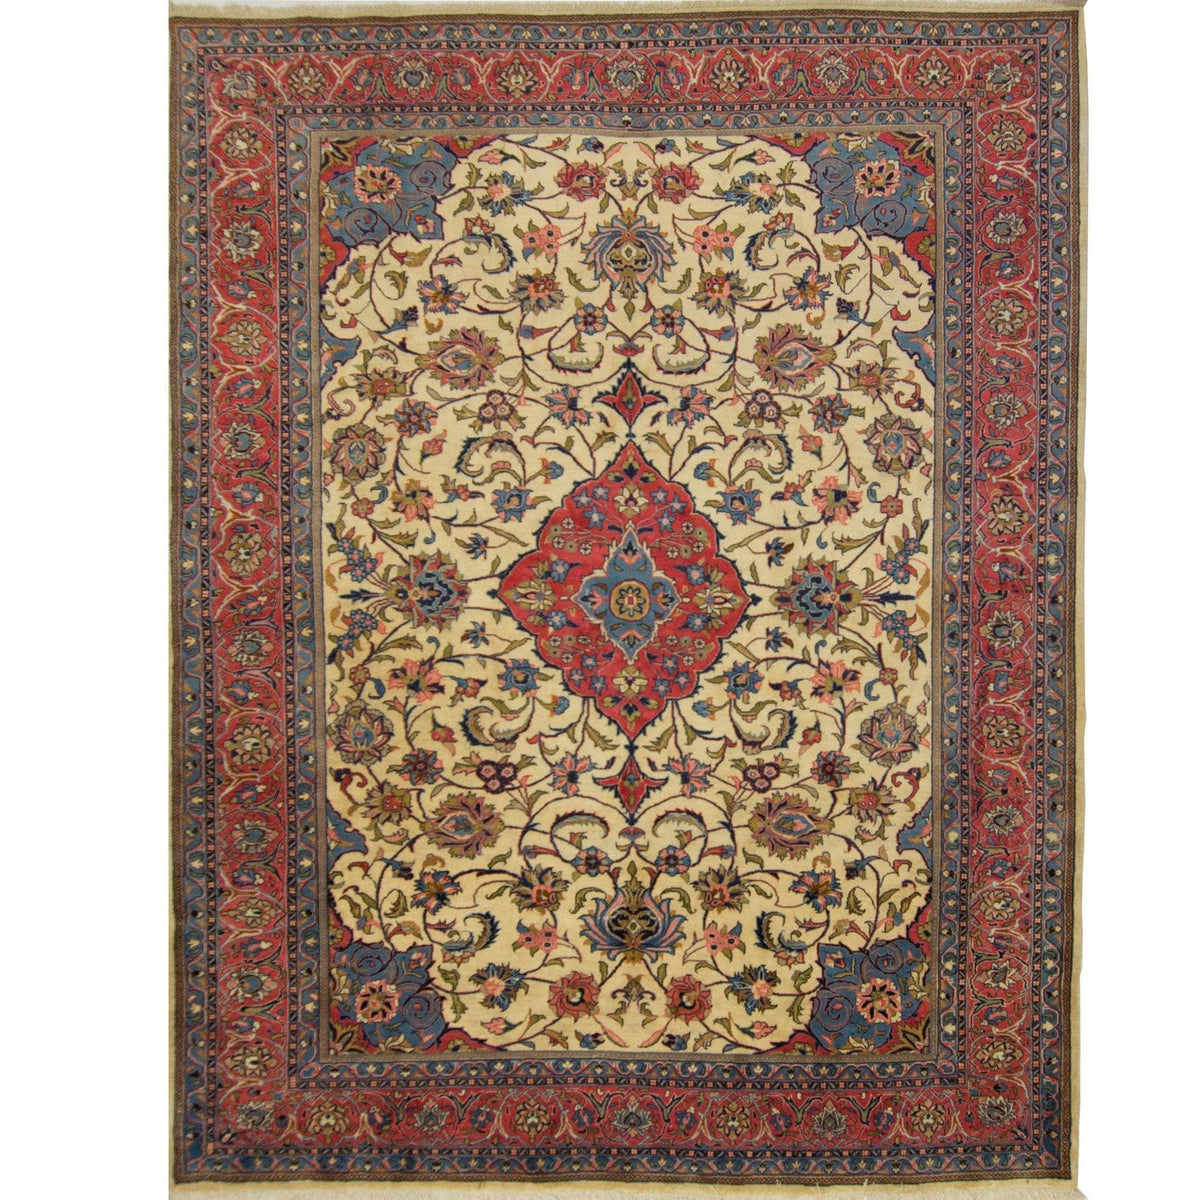 Fine Hand-knotted Wool Persian Saruk Rug 250cm x 333cm